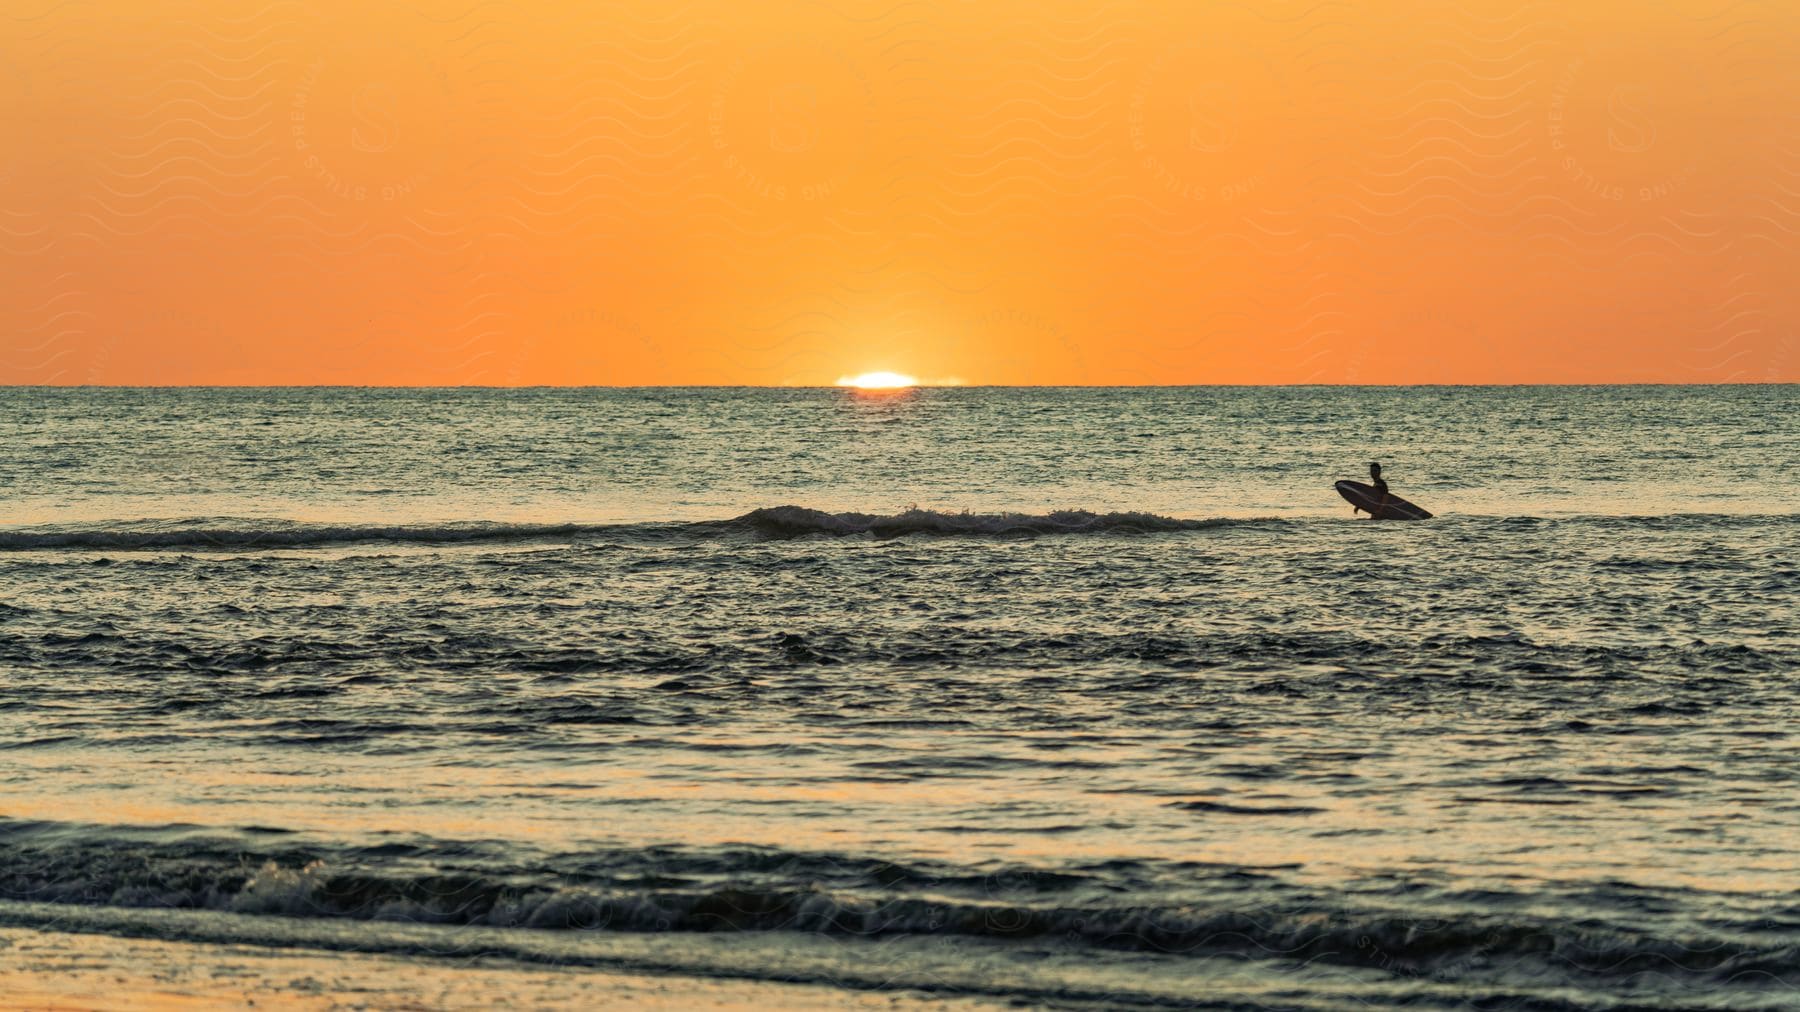 Surfer carrying a surfboard in the ocean at sunset with the sun setting on the horizon and the sky glowing orange.